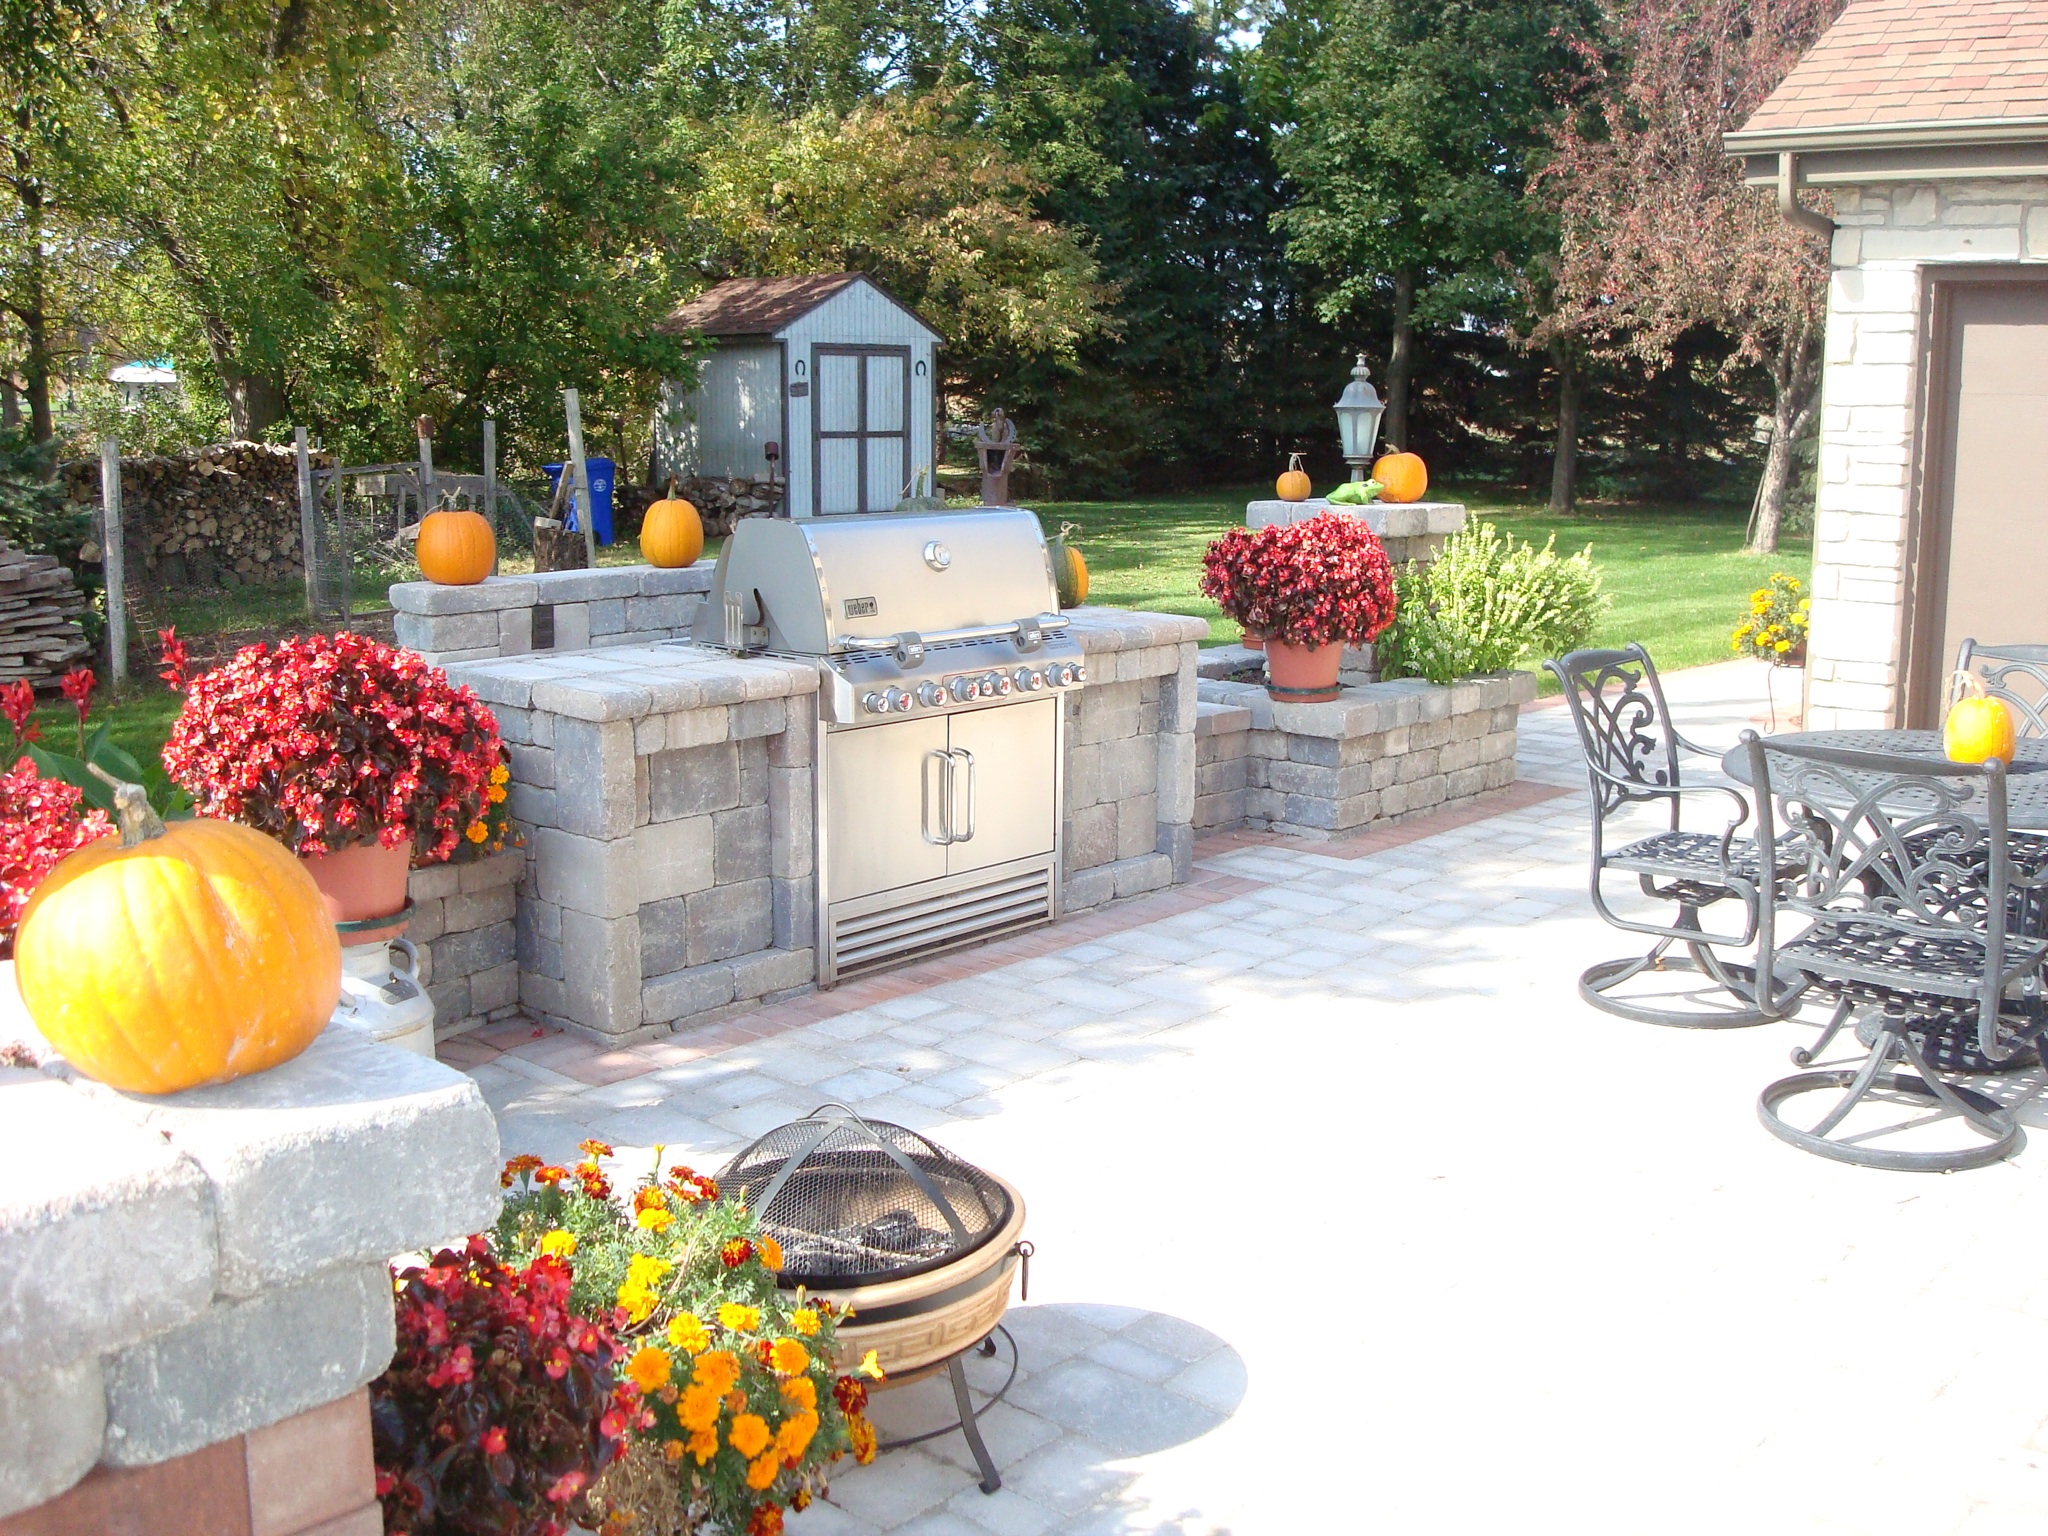 wide-shot of grill and small outdoor kitchen with patio seating area and flower pots